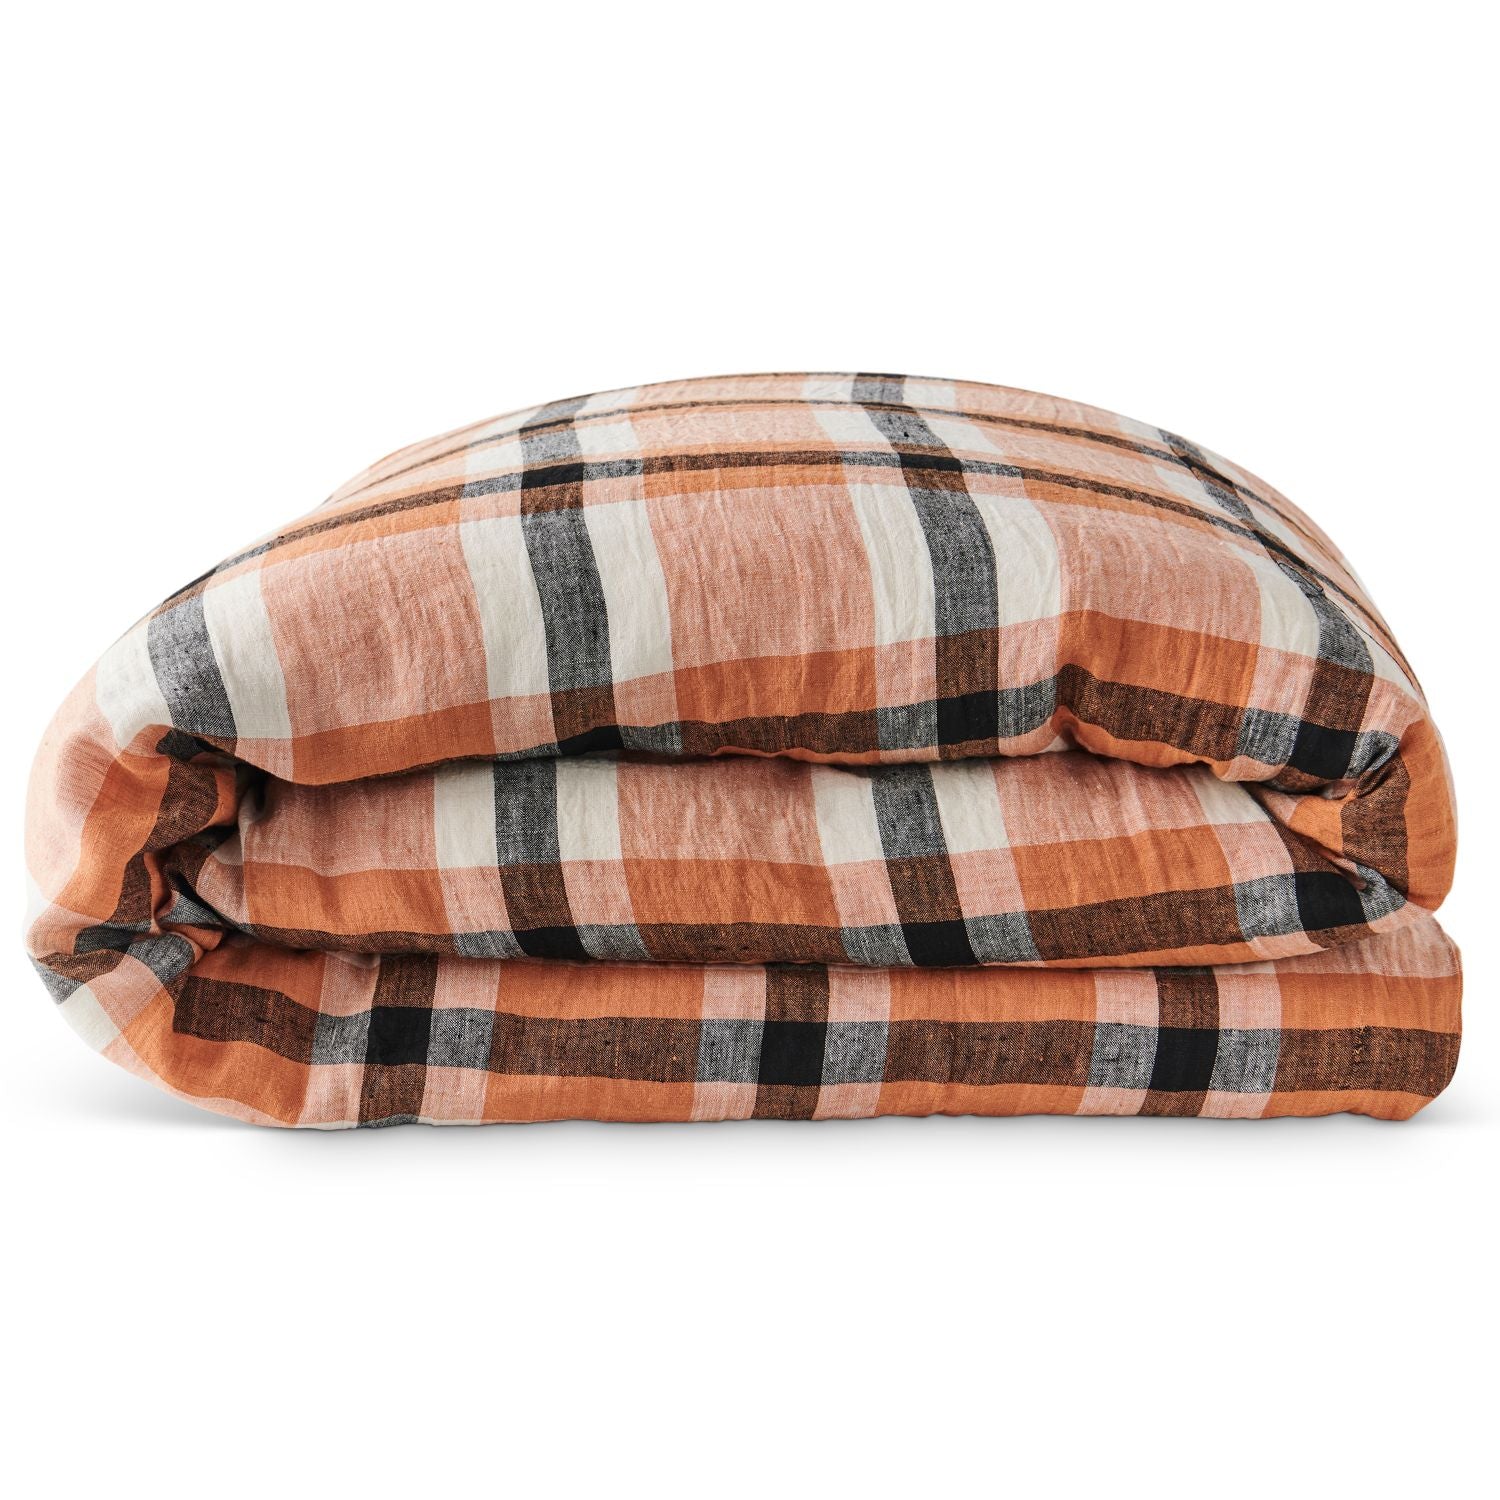 Kip and Co Coffee and Cream Tartan Quilt Cover stockist Perth Fremantle Leederville